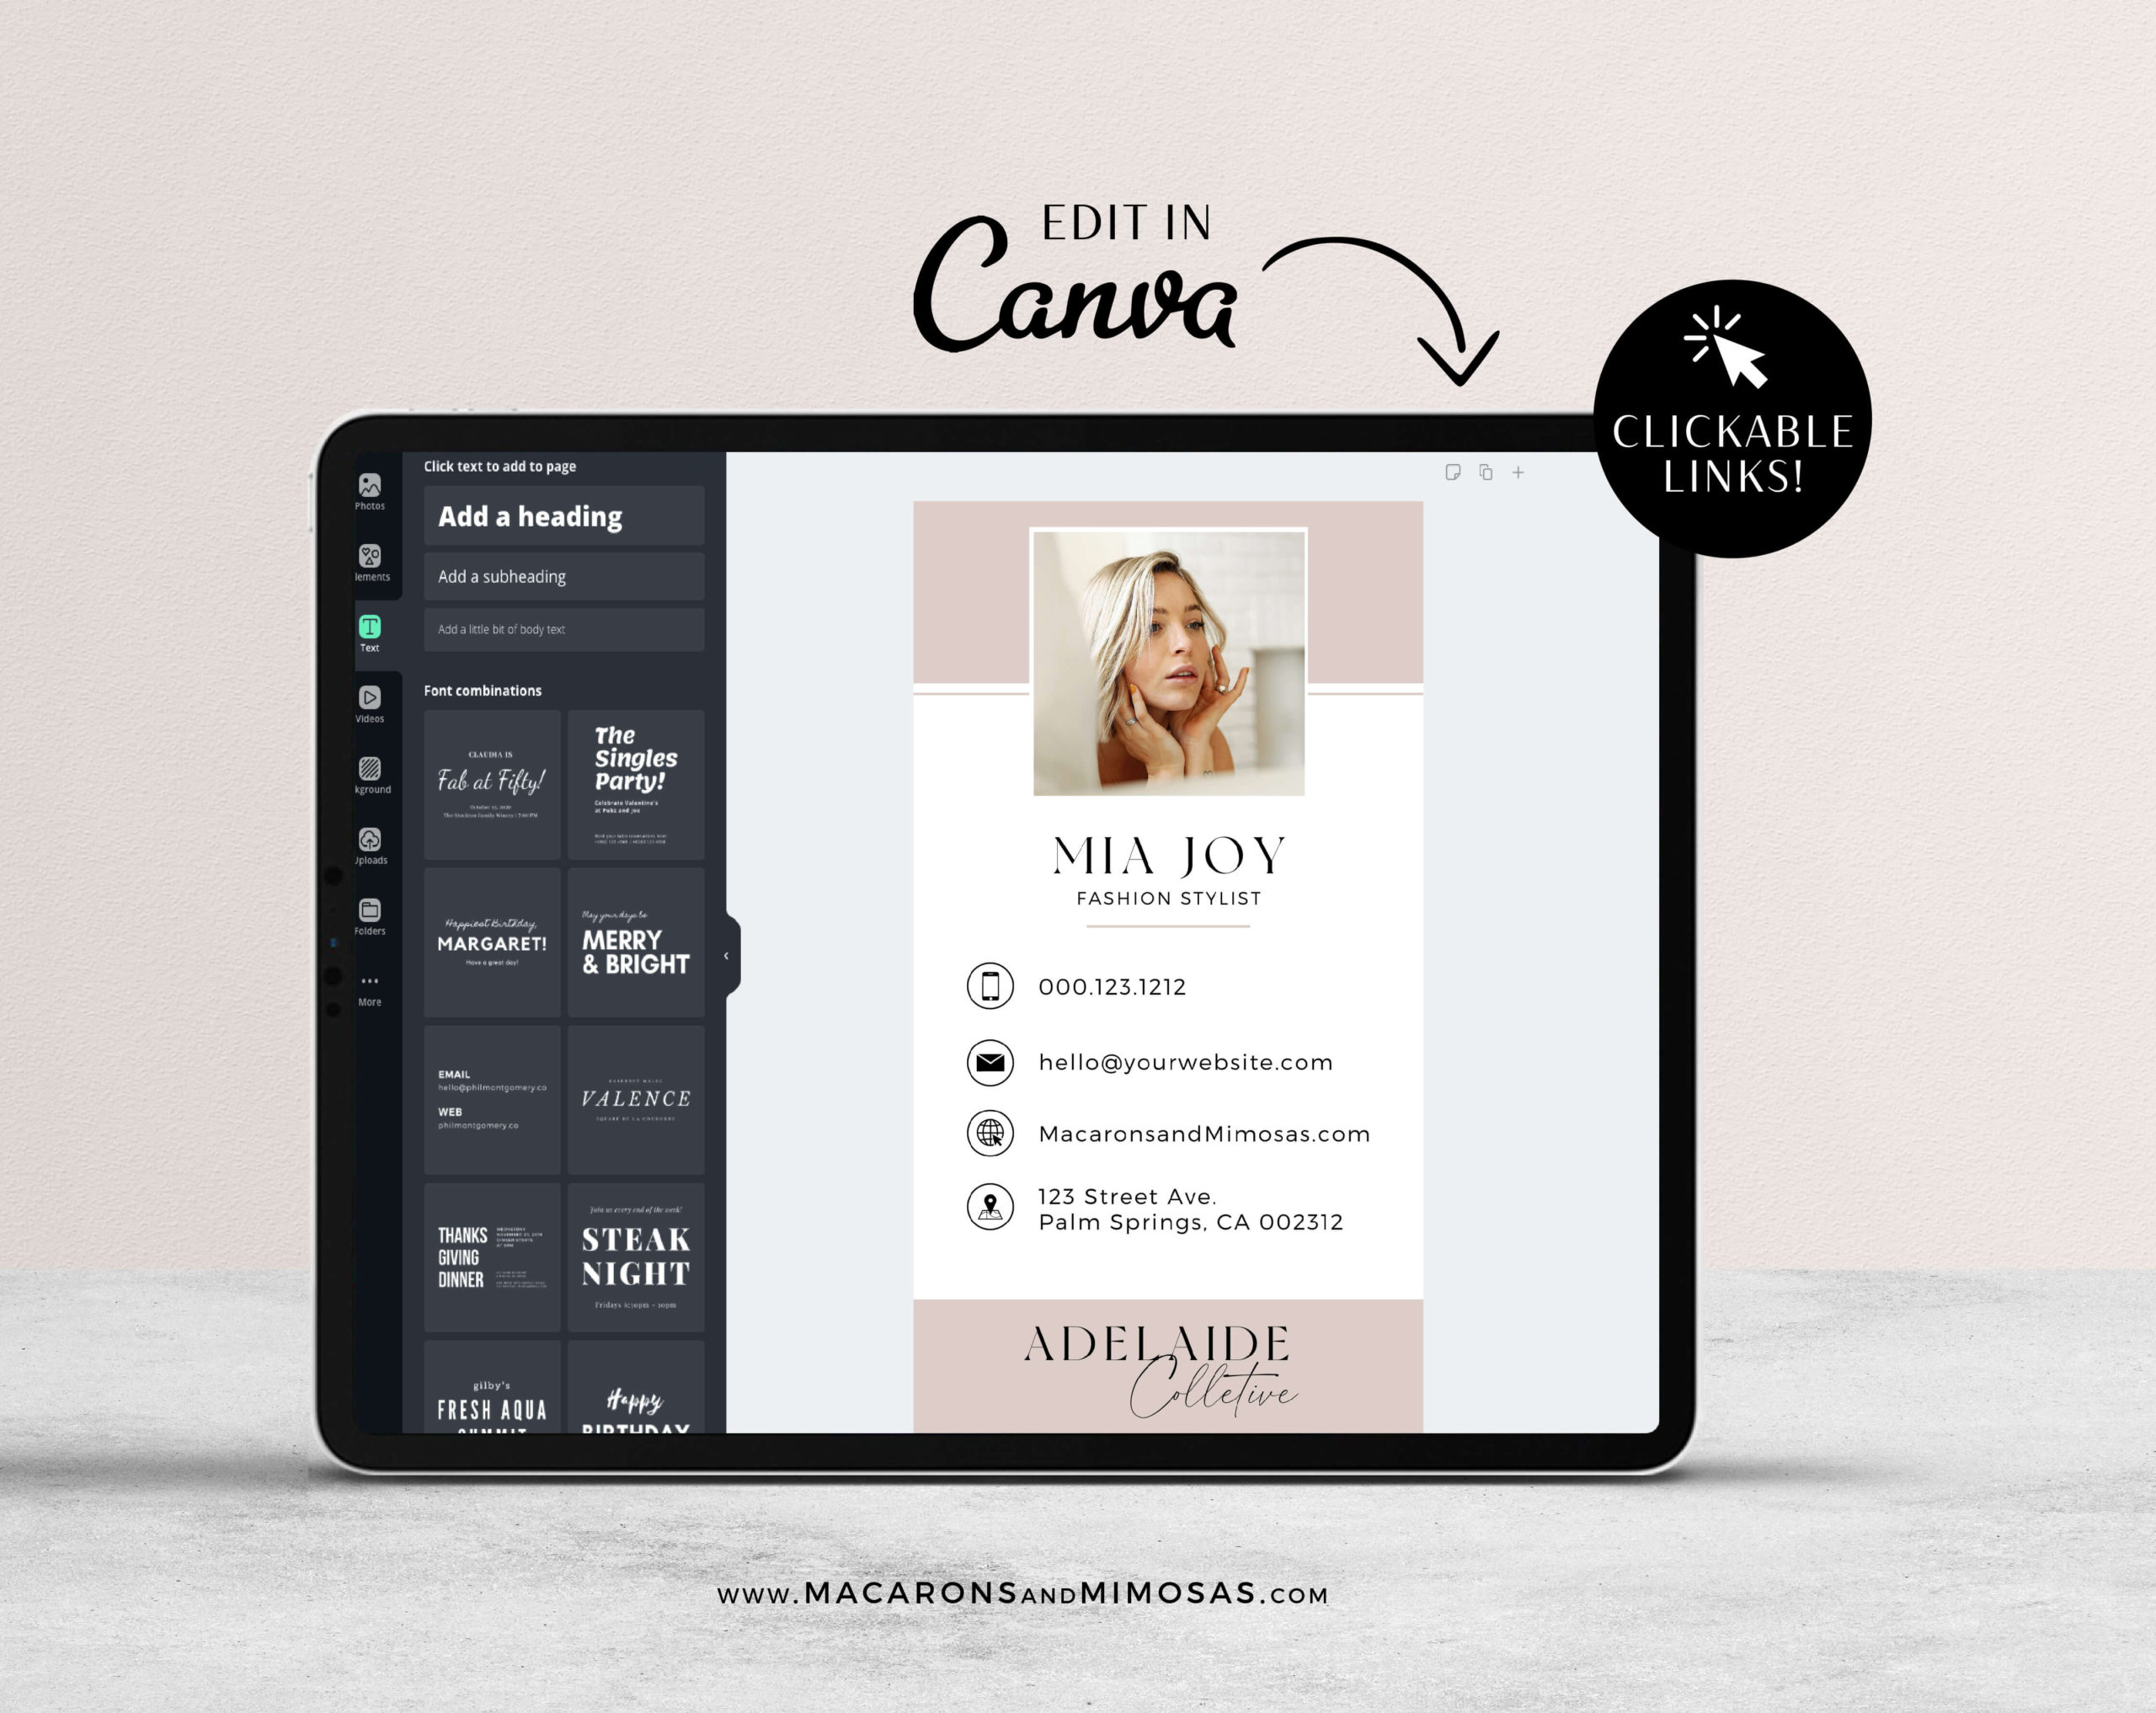 Pink Digital business card Canva template with clickable links, How to create DIY Modern Minimalist Black Real Estate Digital Business Card